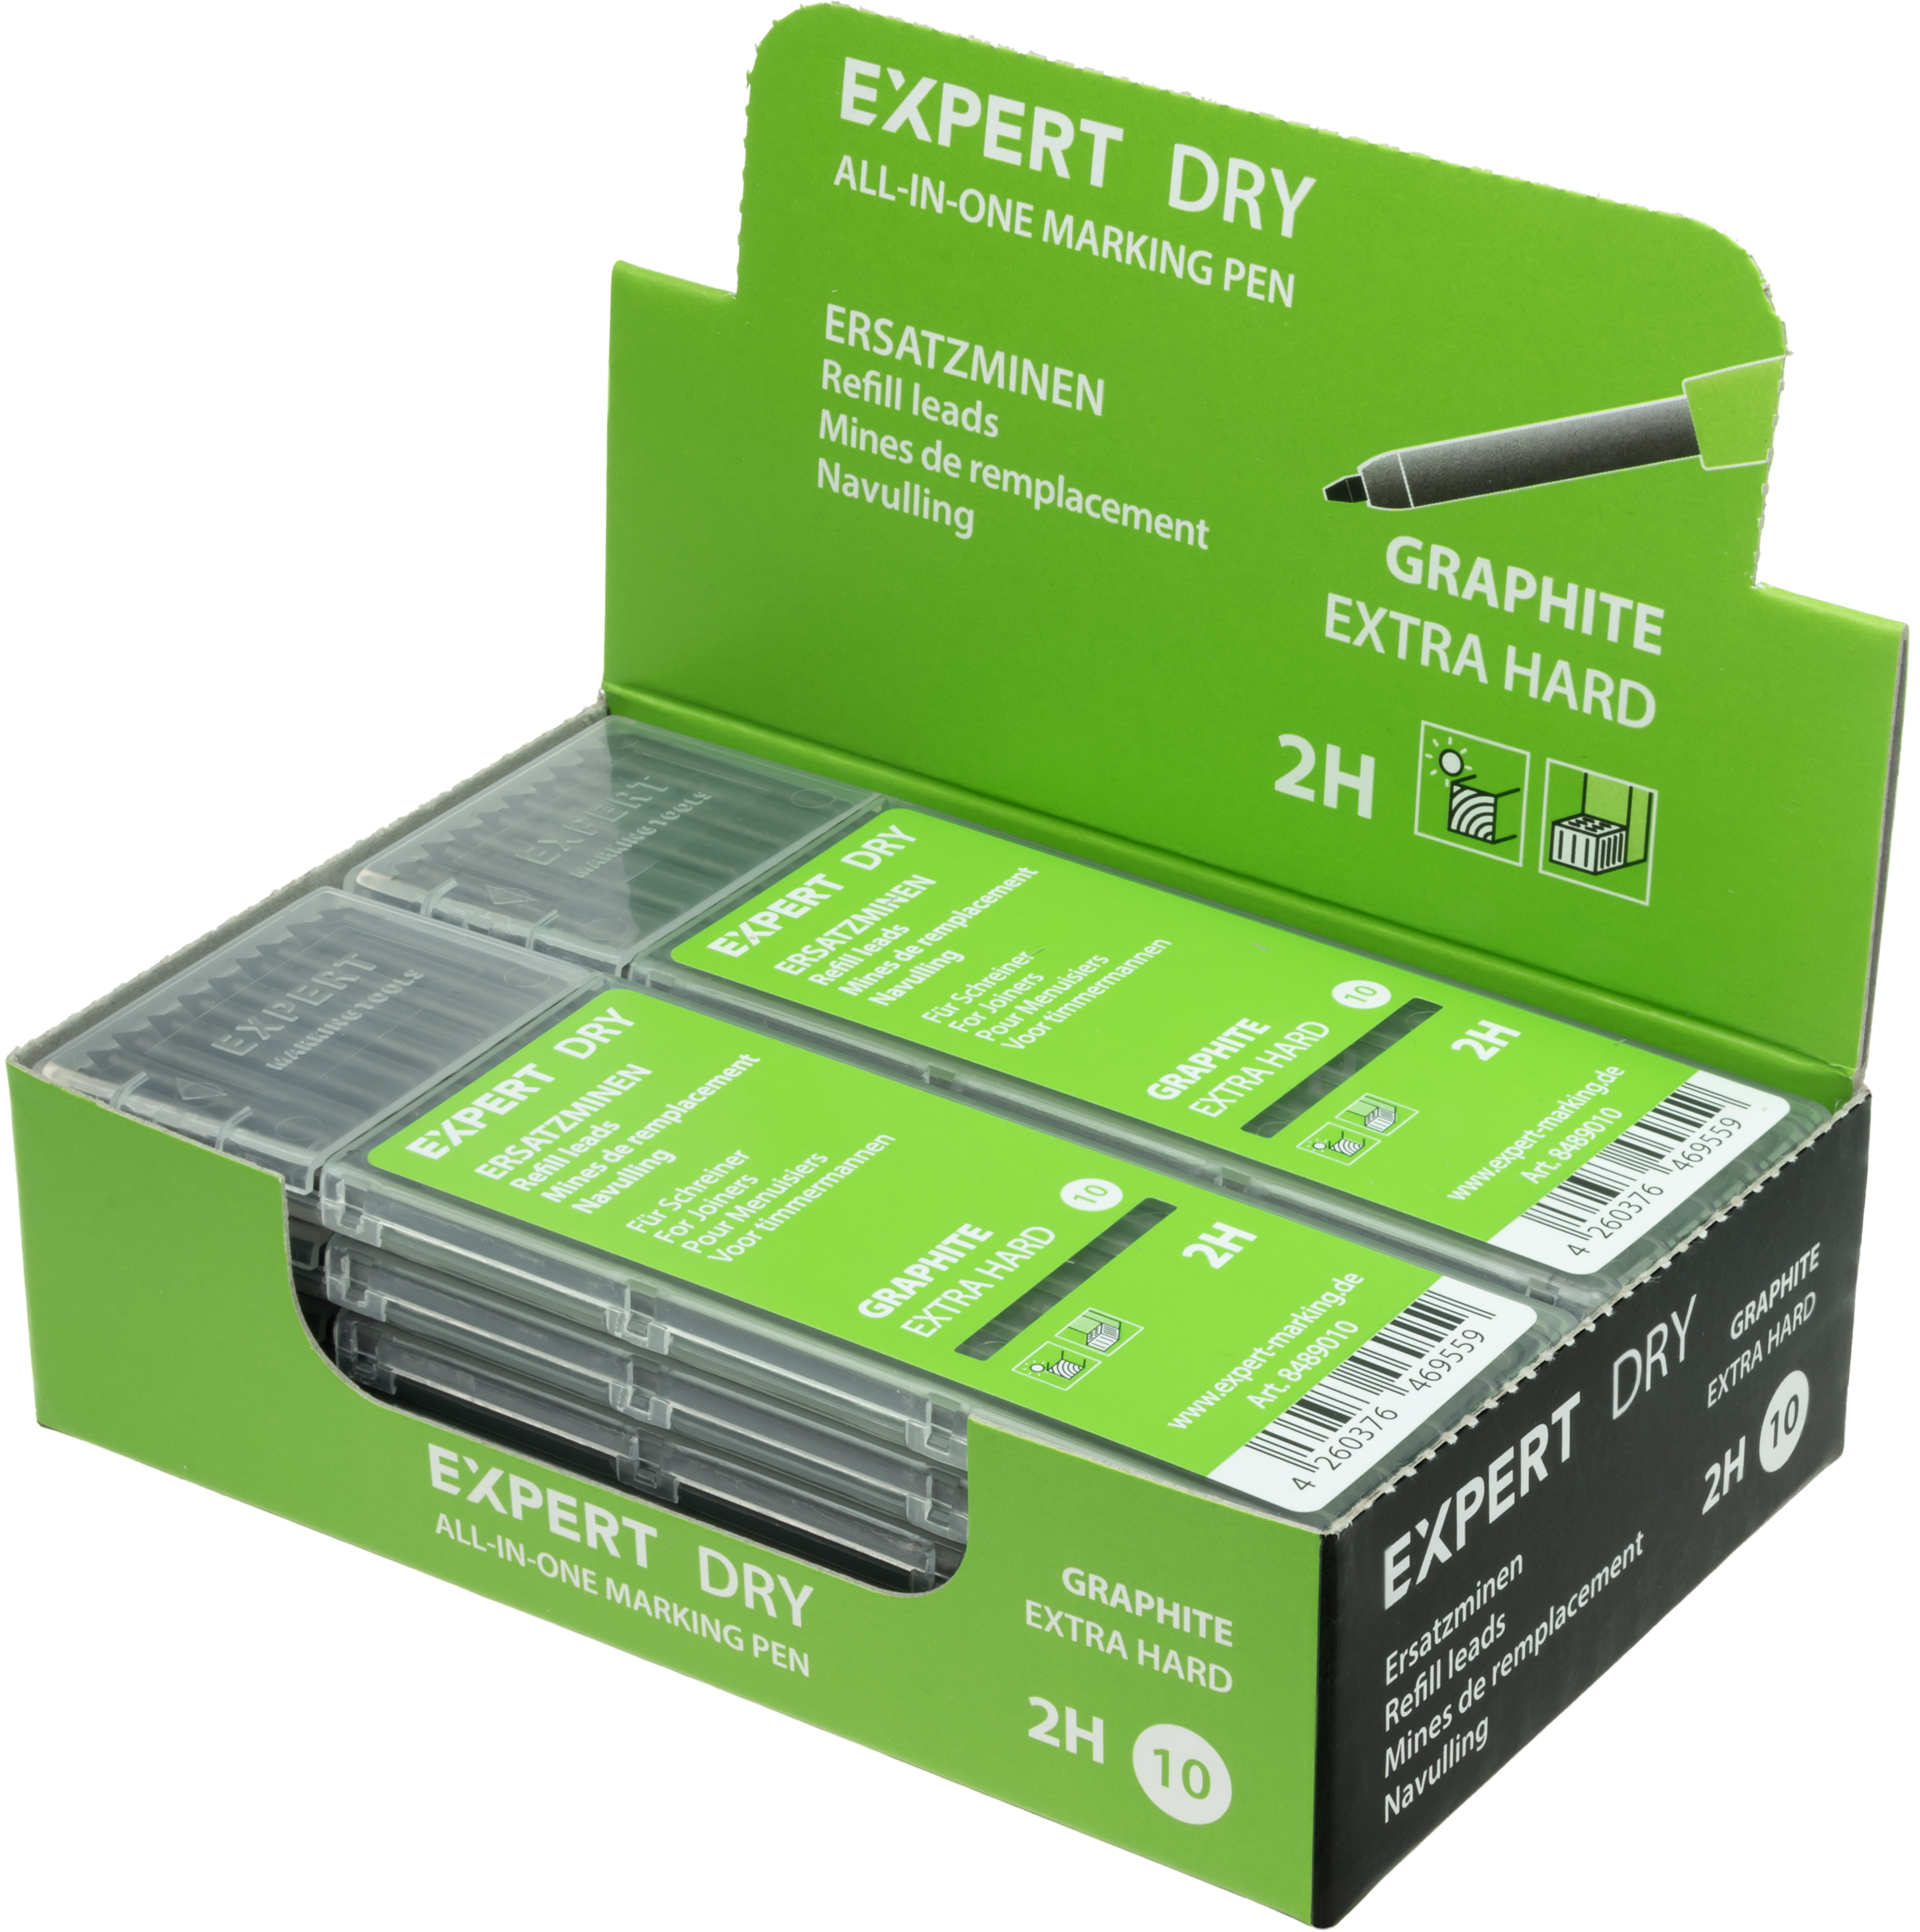 EXPERT DRY refill leads GRAPHITE 2H